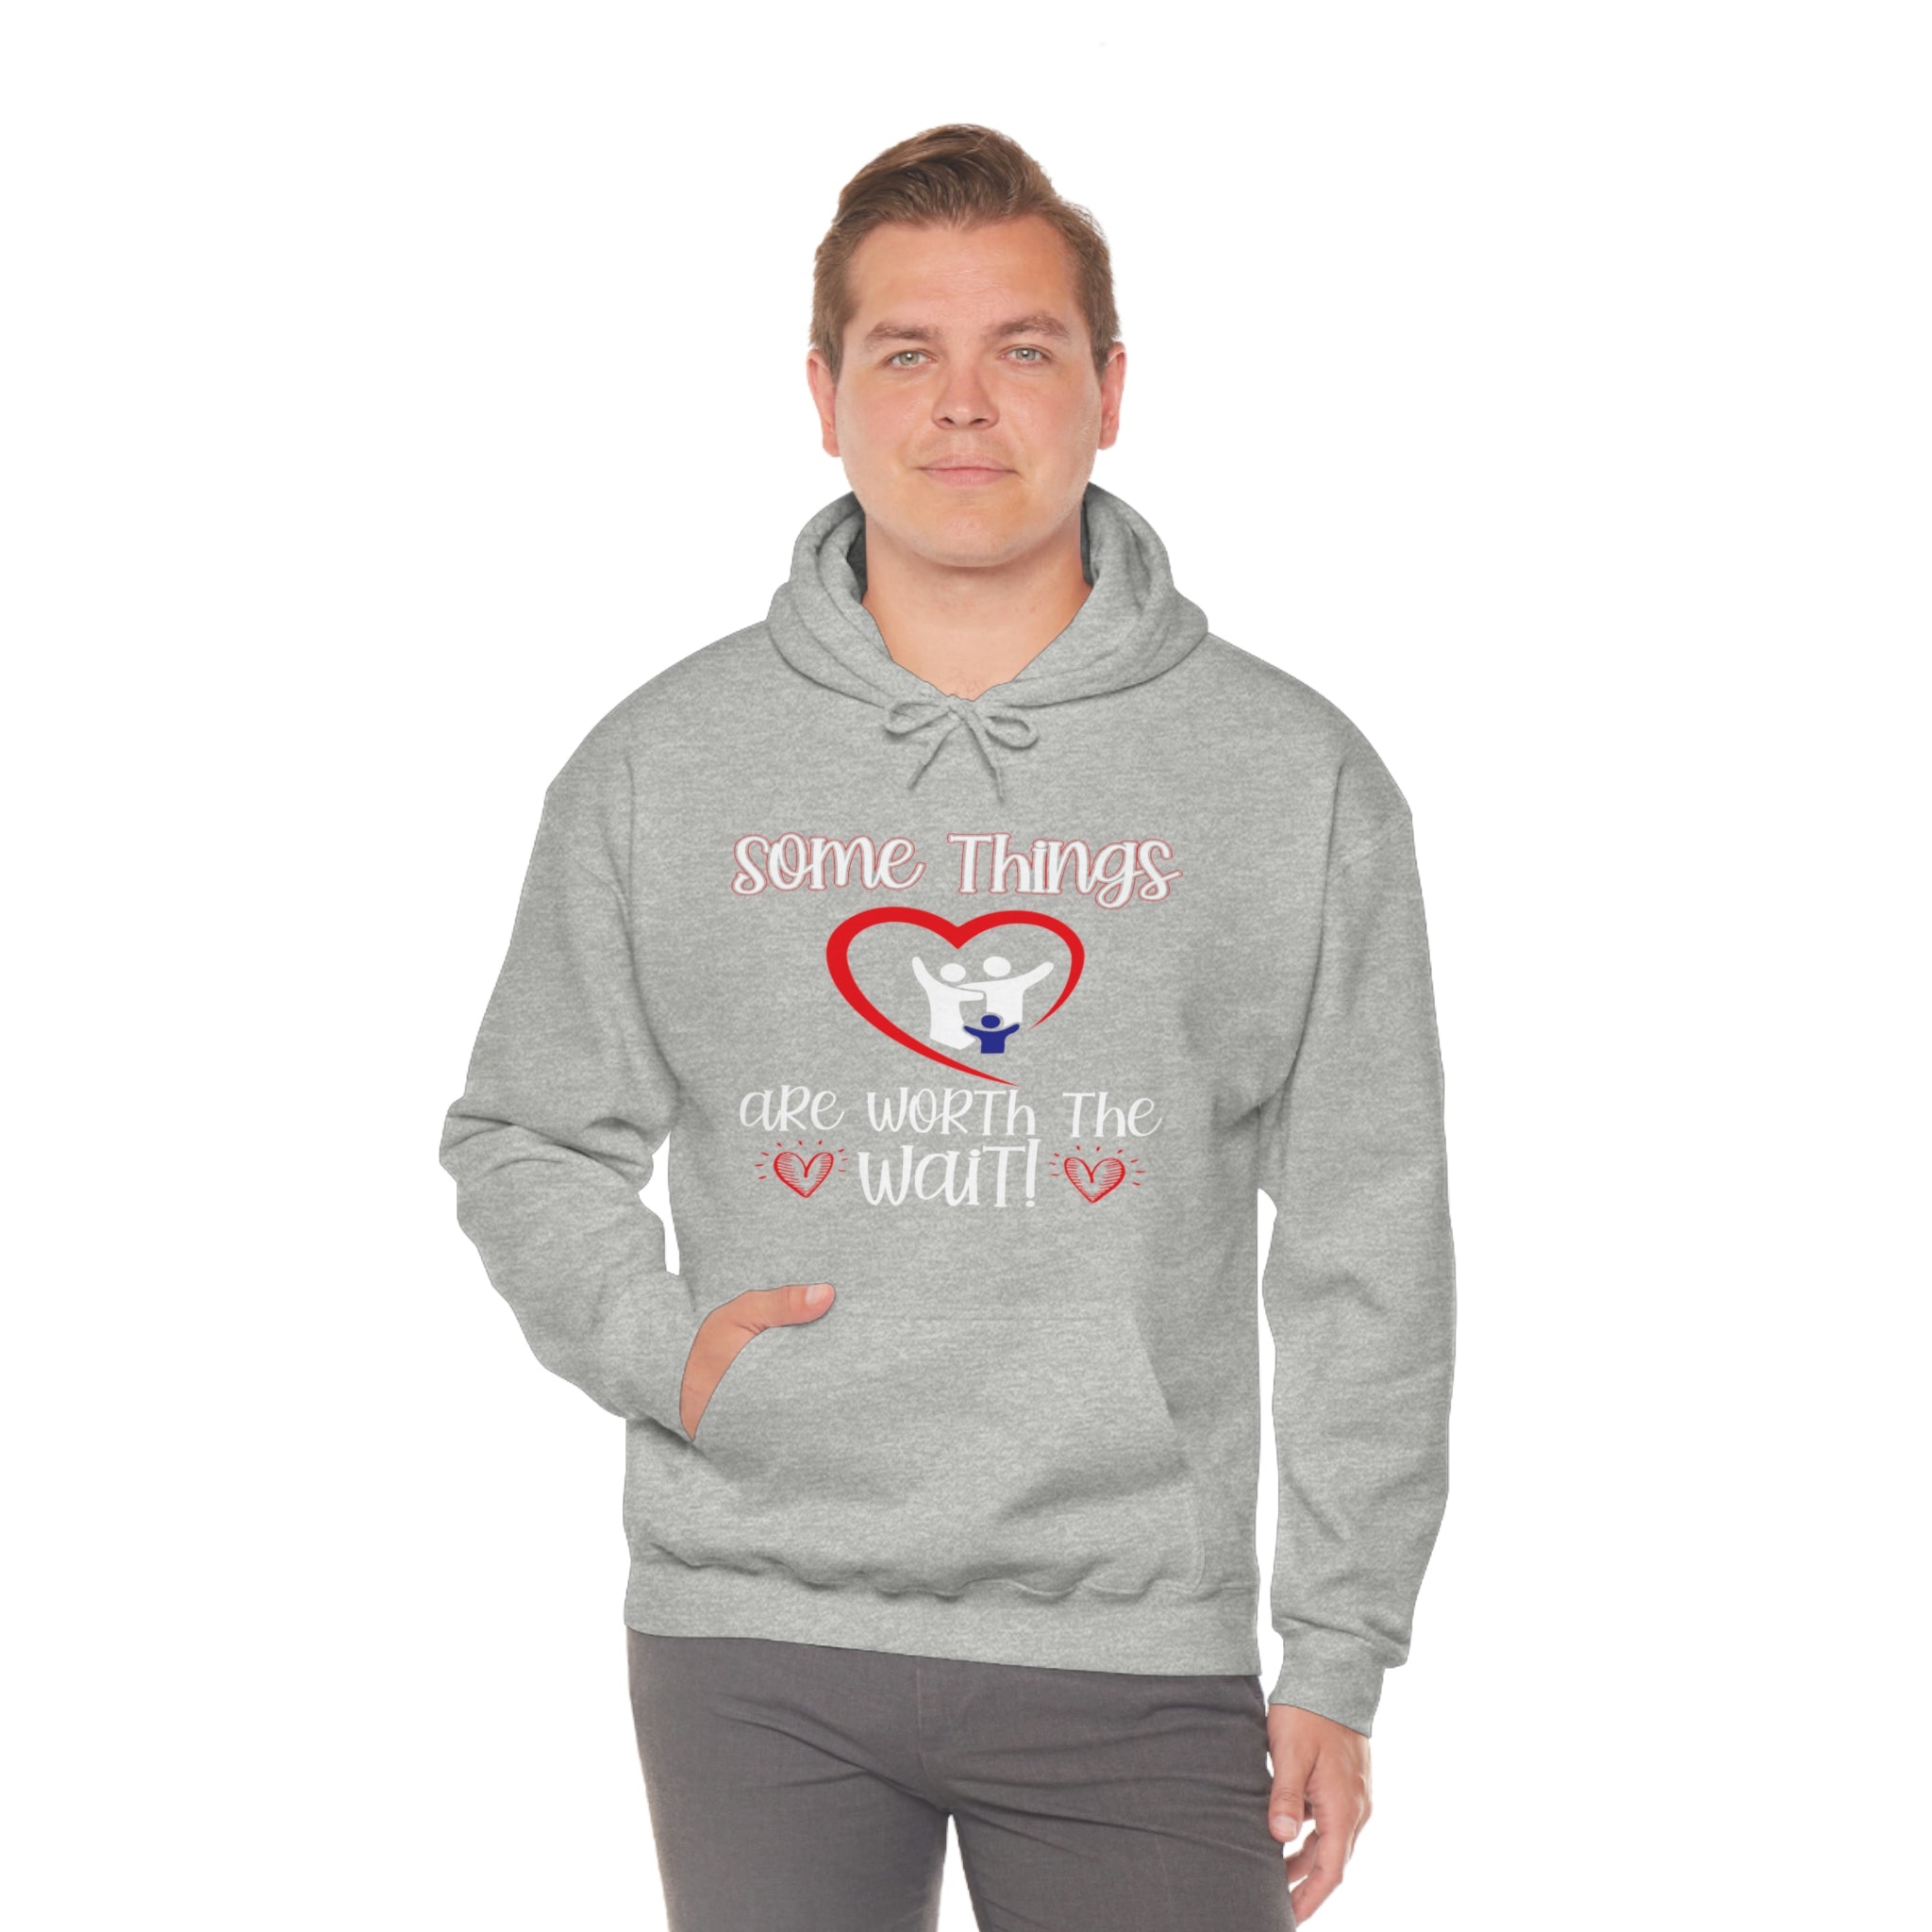 Some Things Are Worth The Wait - Unisex Heavy Blend™ Hooded Sweatshirt